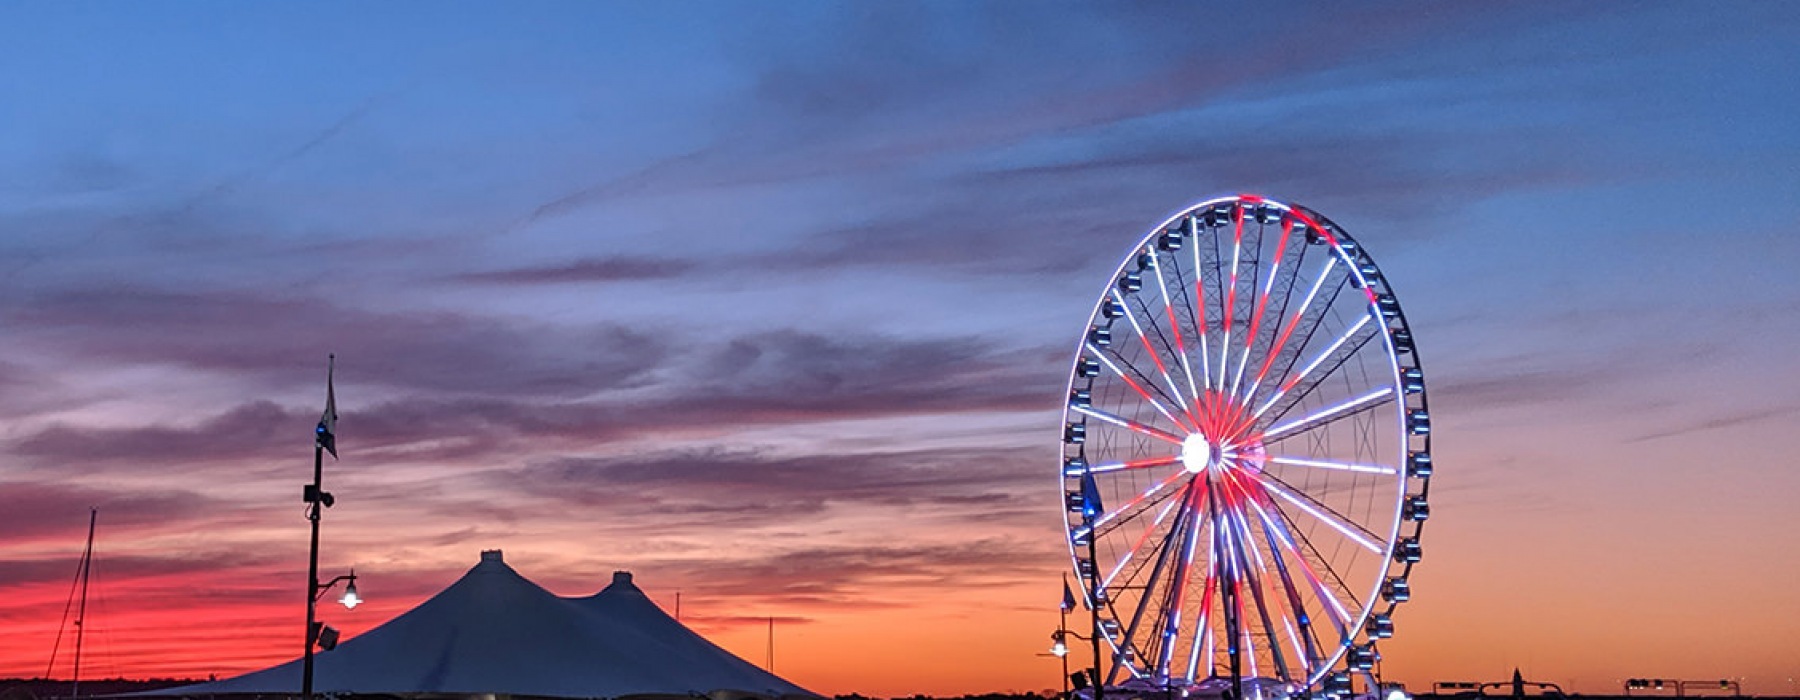 sunset sky with a large ferris wheel